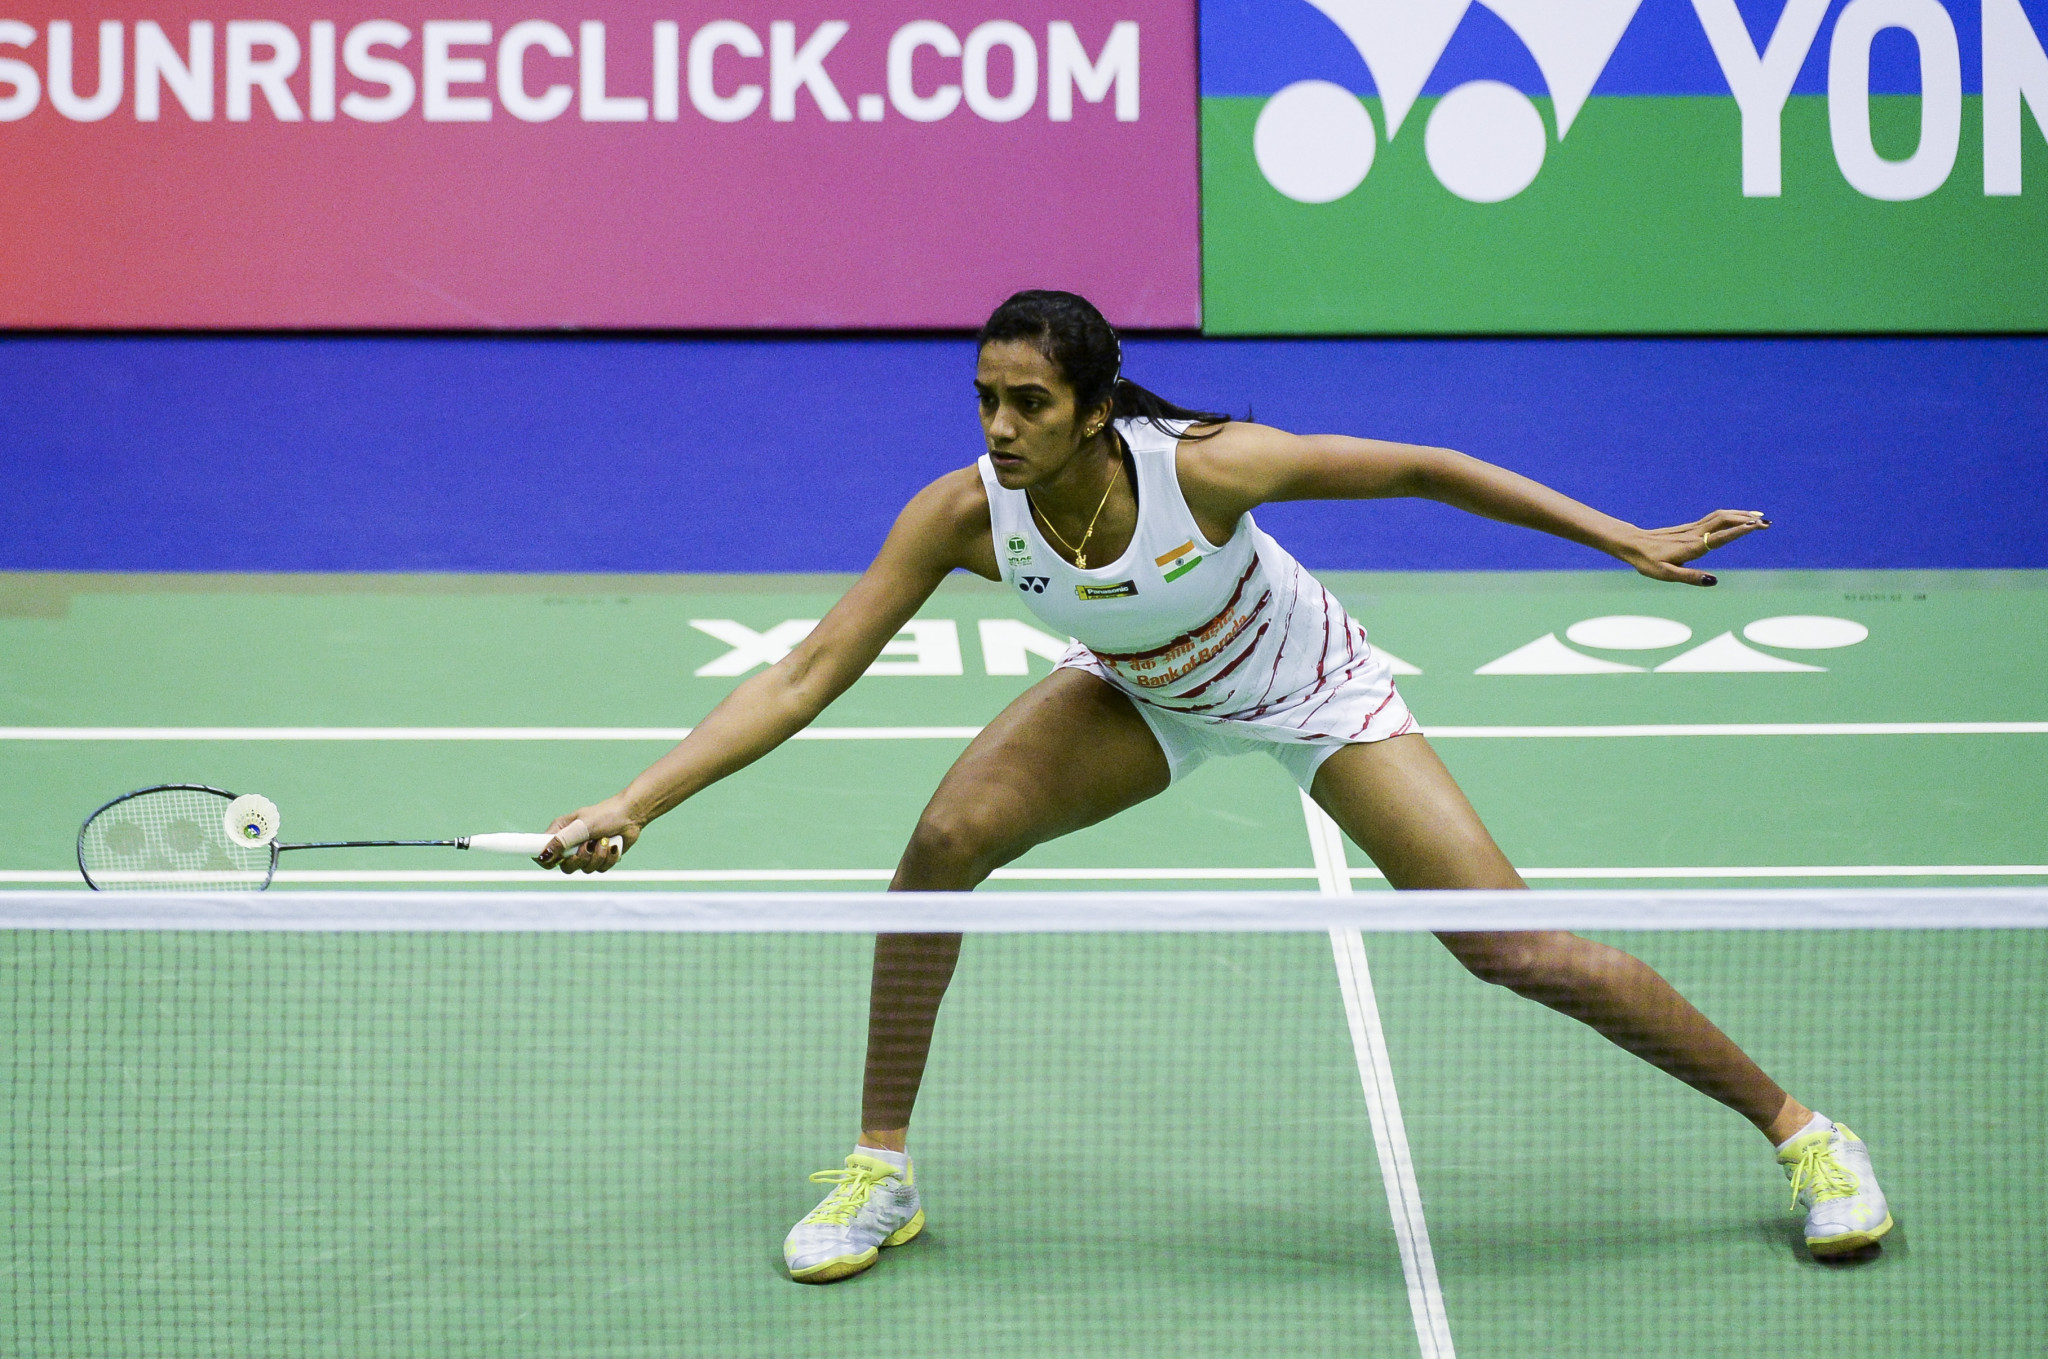 Second seed PV Sindhu will face favourite Tai Tzu-ying in Sunday's women's singles final ©Getty Images